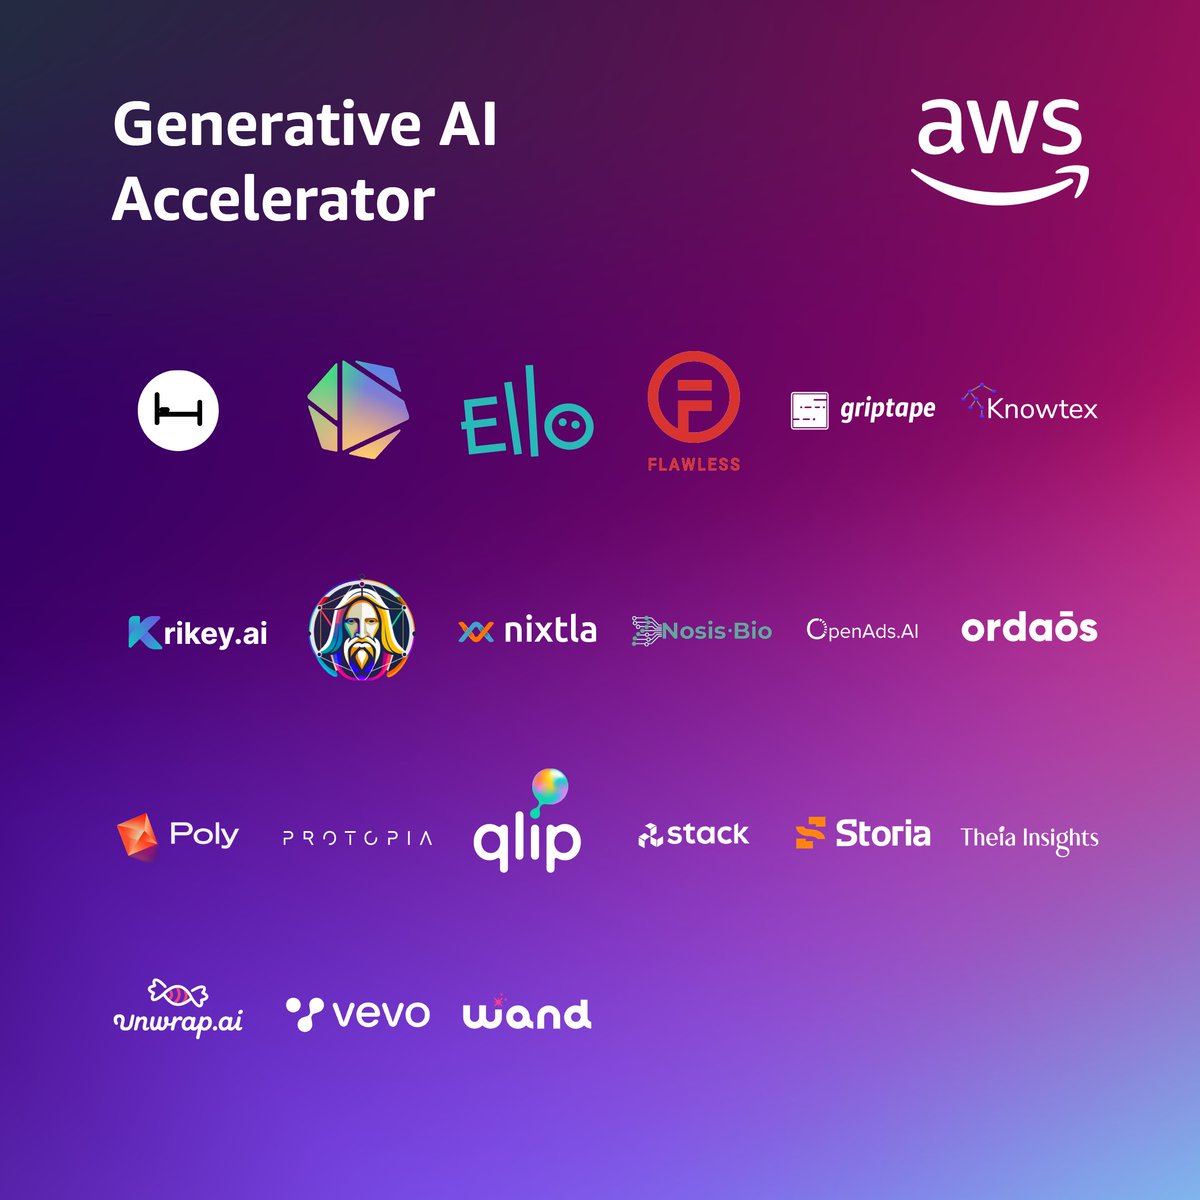 We are honoured and excited to be selected to be in the global AWS Generative AI Accelerator program. Only a small number of companies were selected from 1000's of applicants, all proving what’s possible with generative AI. aws.amazon.com/blogs/startups… #AWSGenAIAccelerator #AI